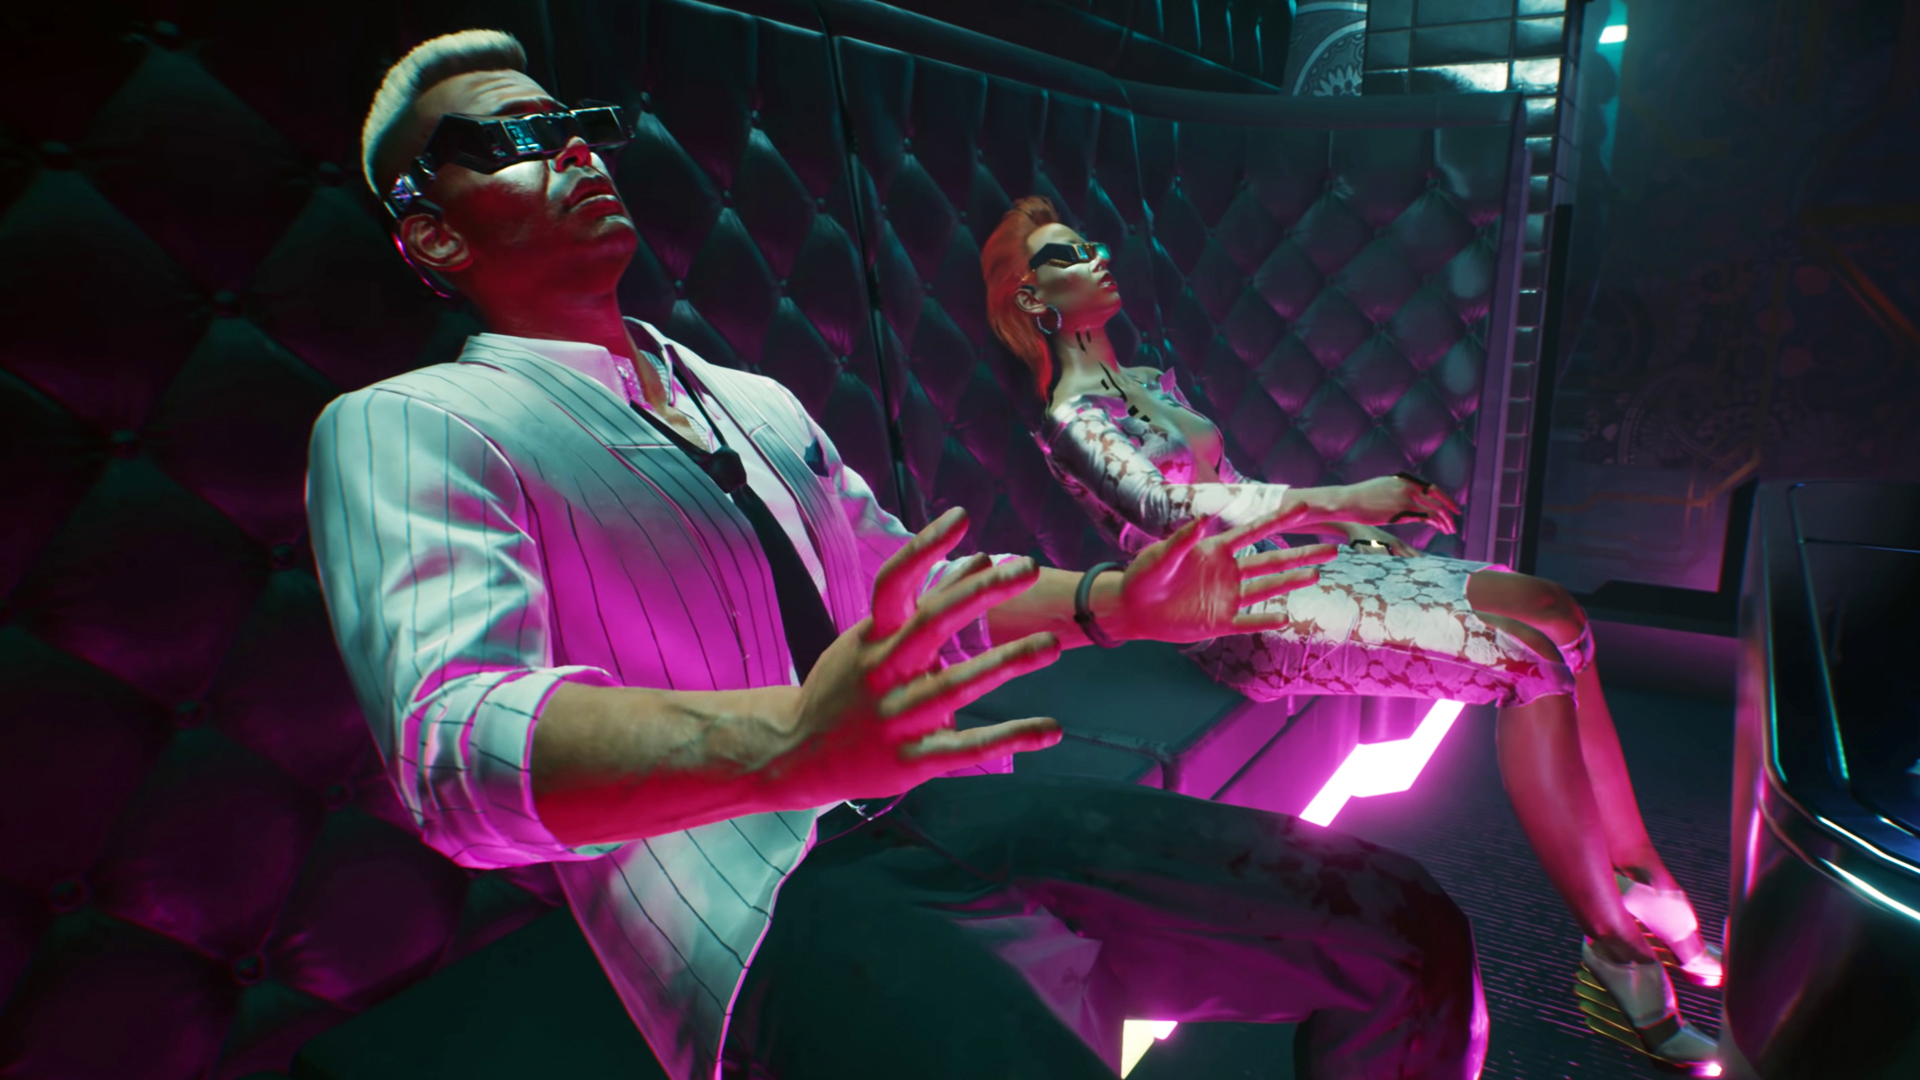 Cyberpunk 2077 VR Mod Likely Launching This Week